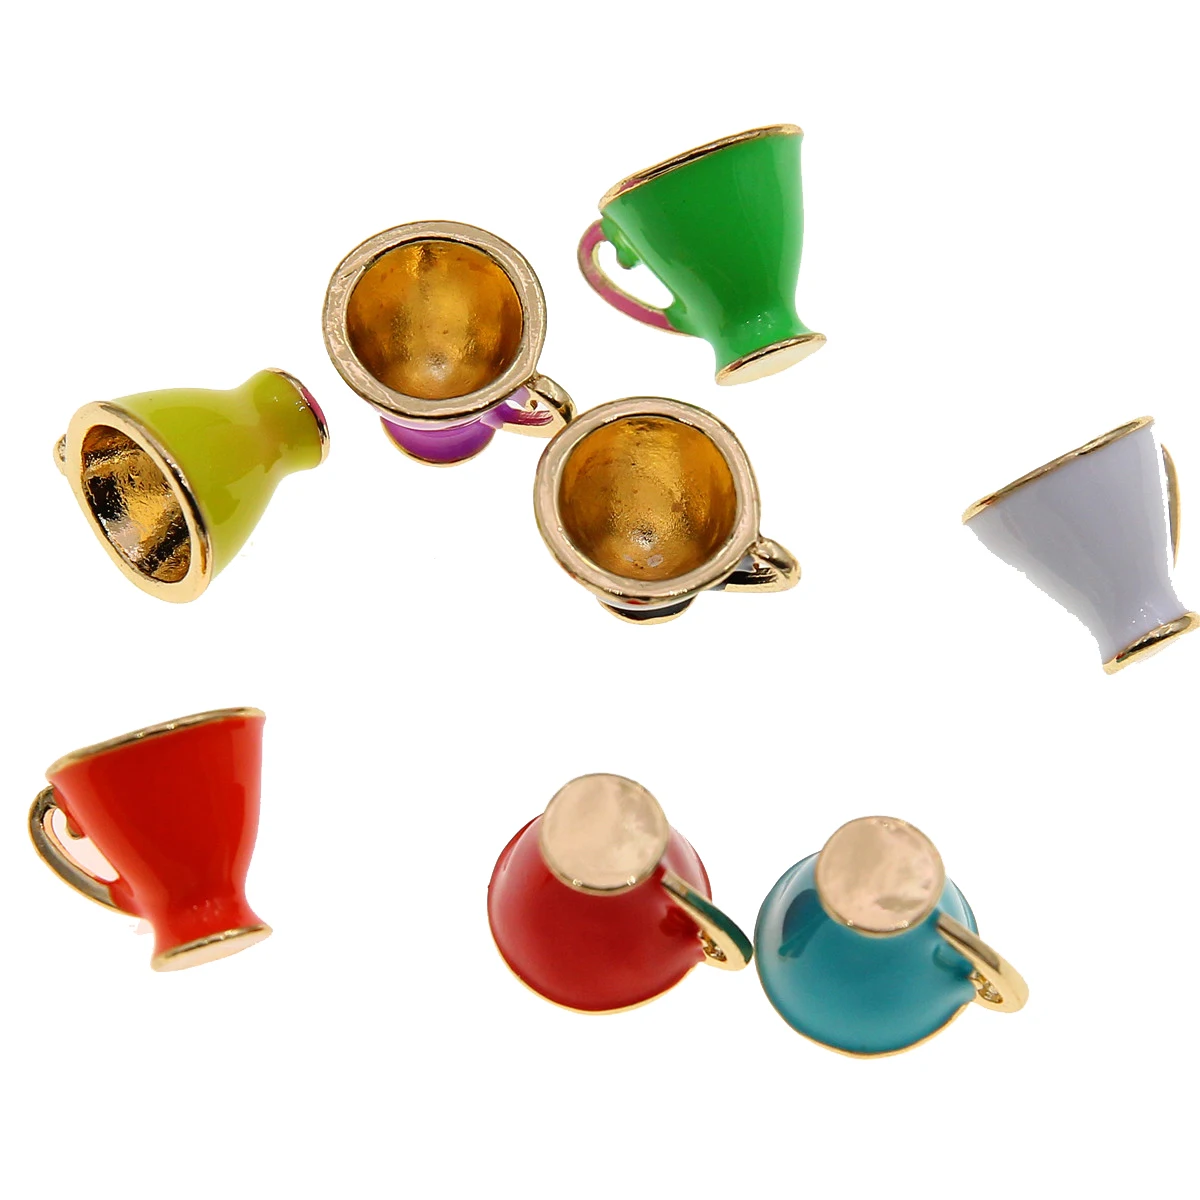 https://ae01.alicdn.com/kf/S5f1df04d4b8547f688349fc3f84cad7cz/50pcs-17-13-13-drip-oil-alloy-perforated-micro-colorful-small-tea-cup-diy-string-accessories.jpg